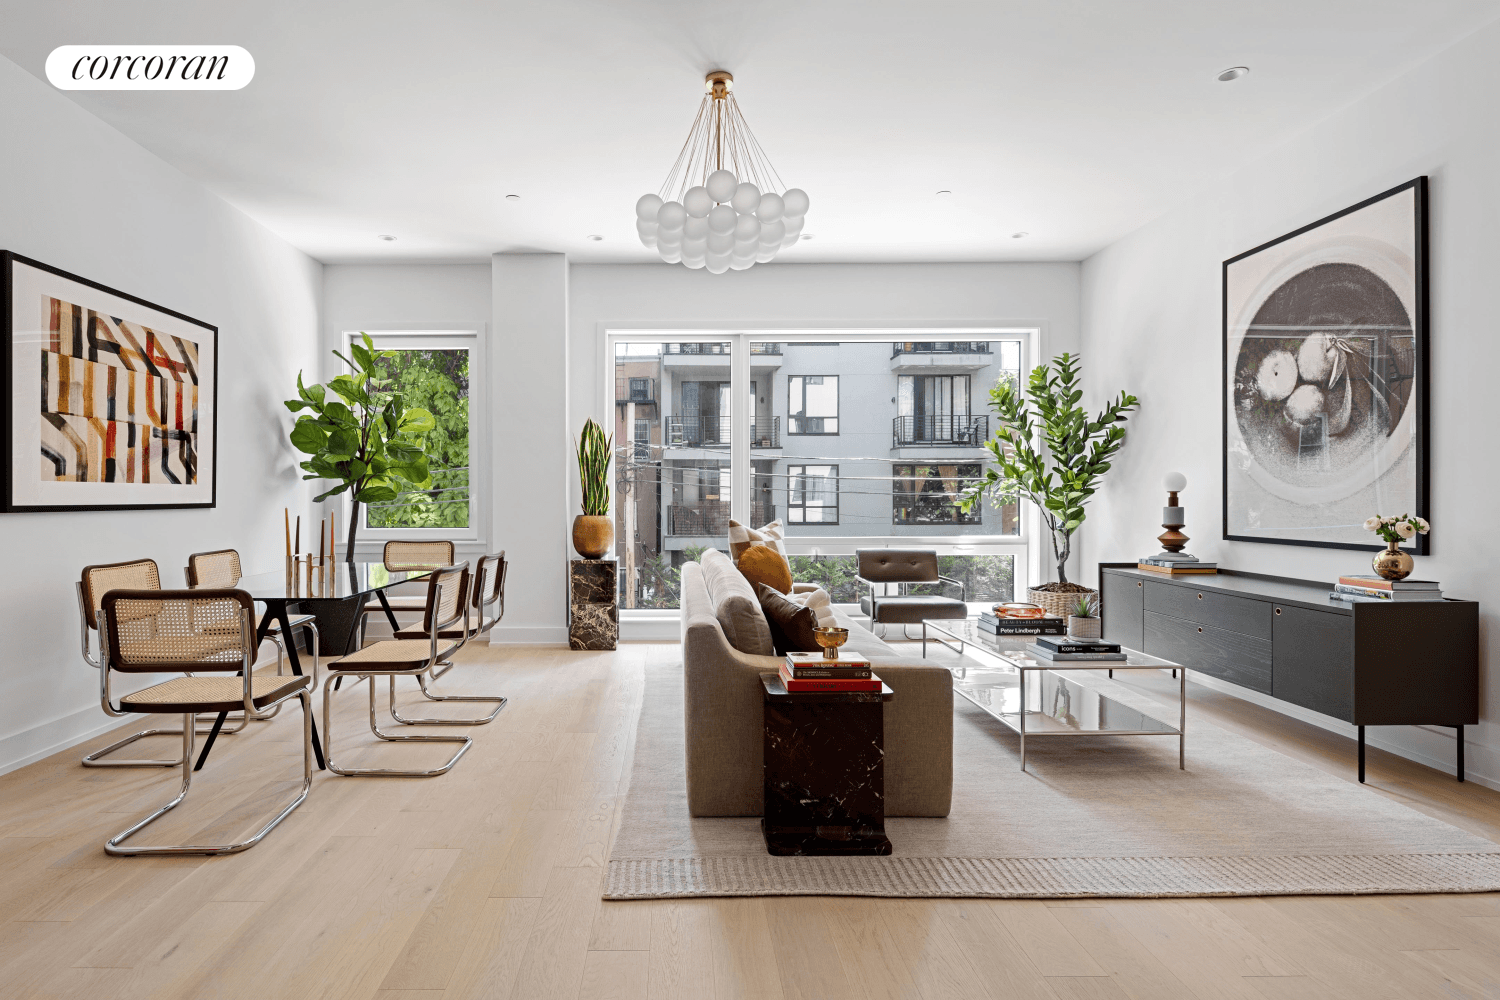 Welcome home to 87 Irving Place, a 25 unit, 7 story boutique building with an elevator, in one of the most picturesque and leafy green historic neighborhoods in brownstone Brooklyn.